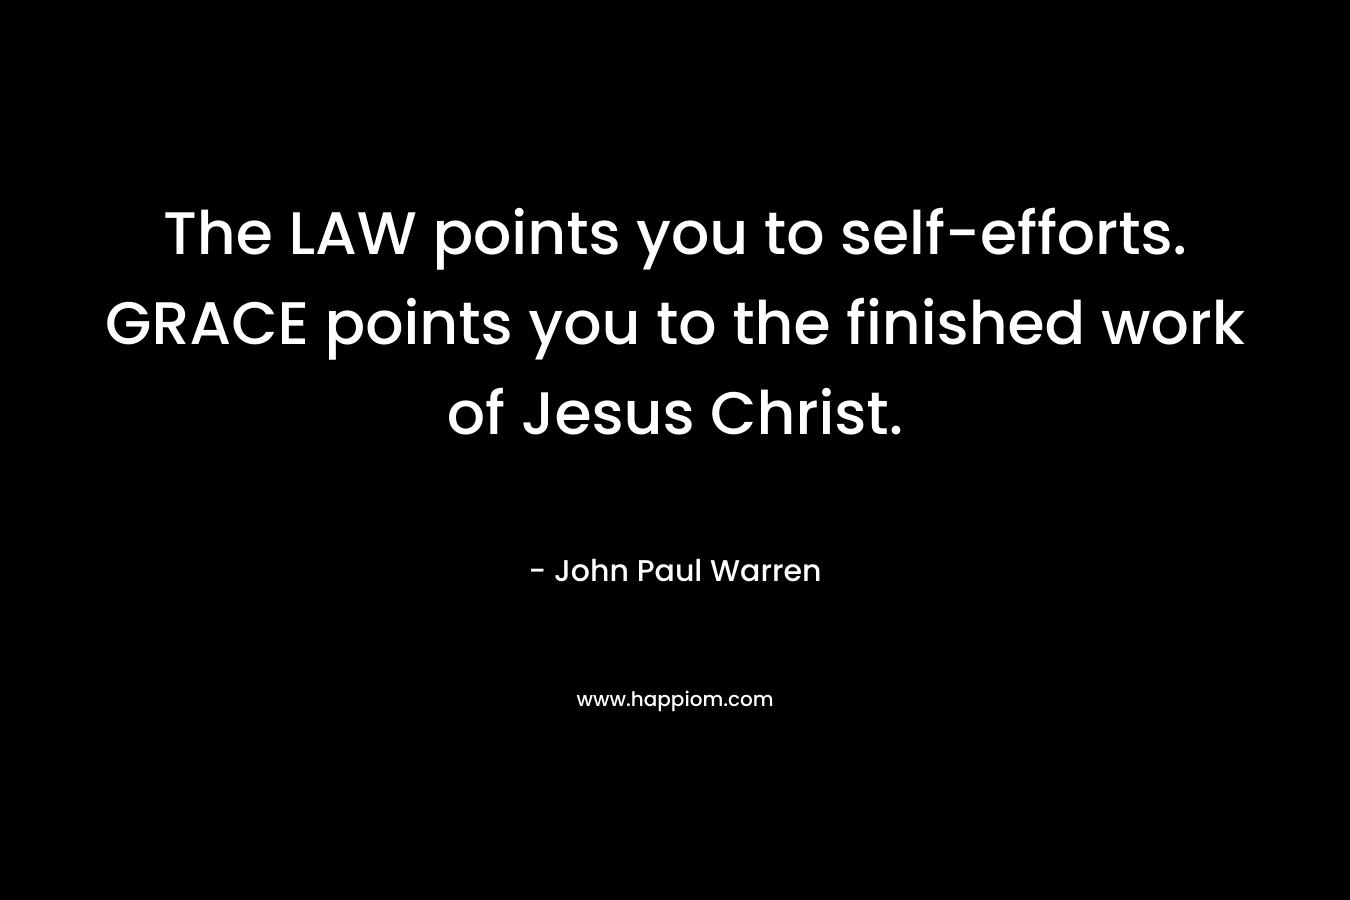 The LAW points you to self-efforts. GRACE points you to the finished work of Jesus Christ.